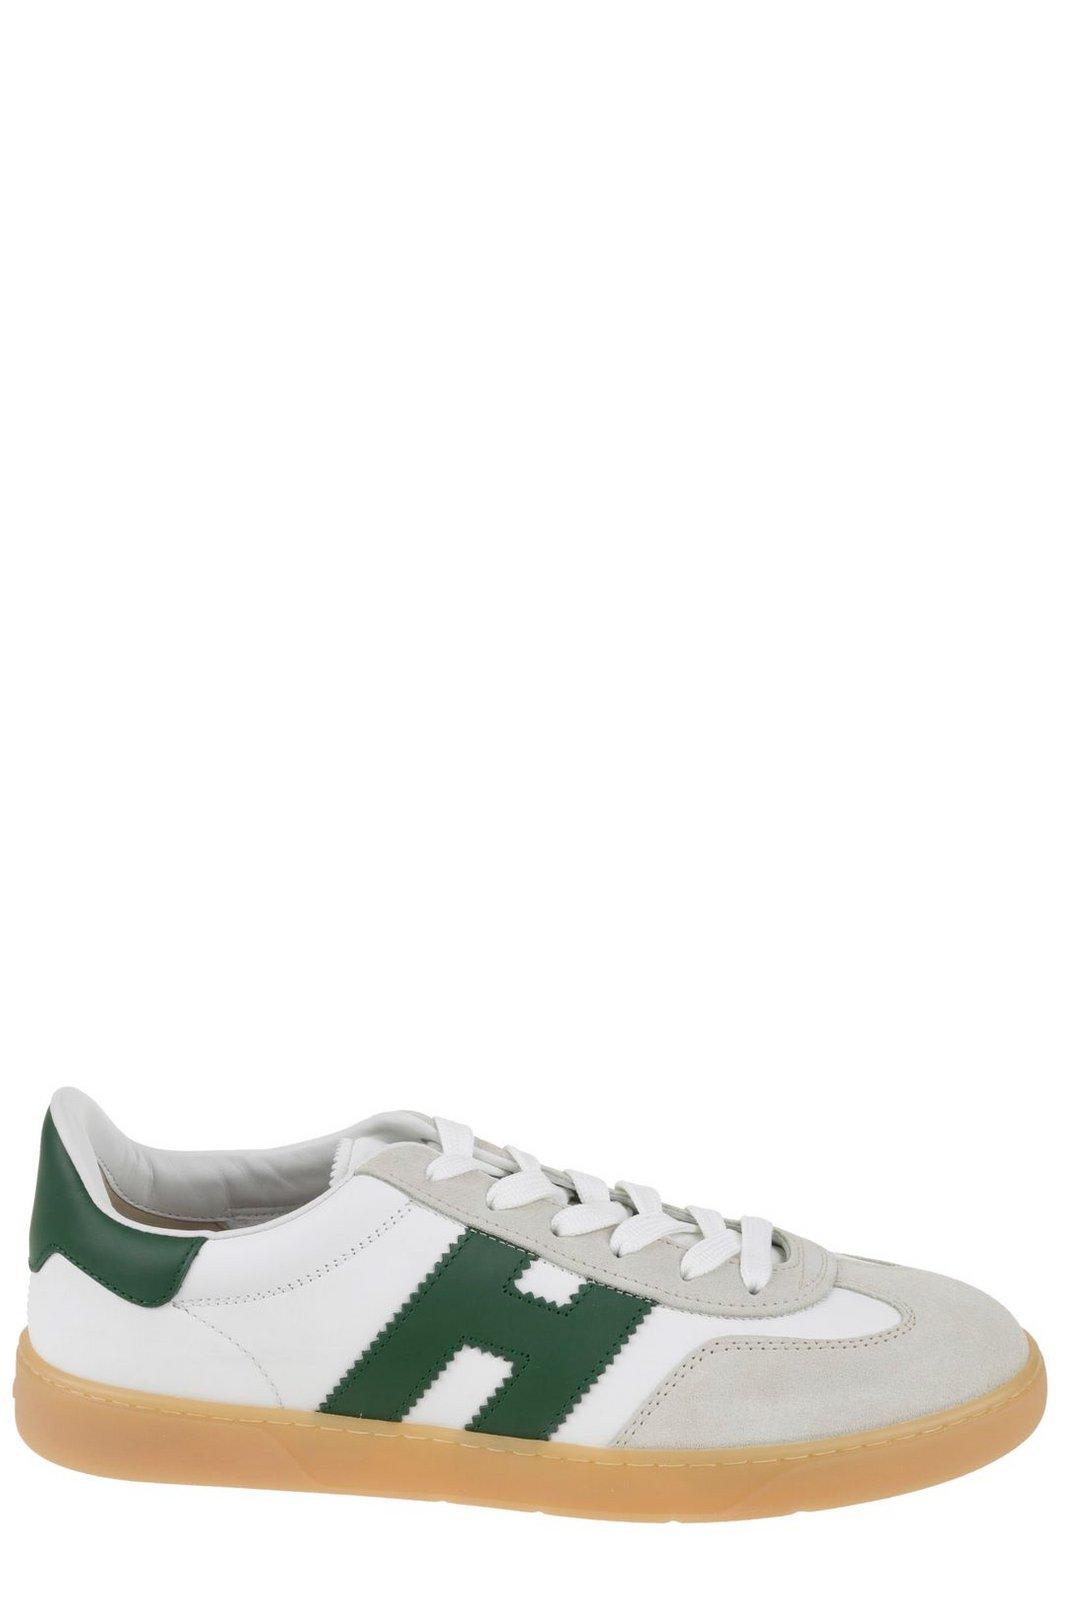 Shop Hogan Cool Side H Patch Sneakers In R Bianco/verde